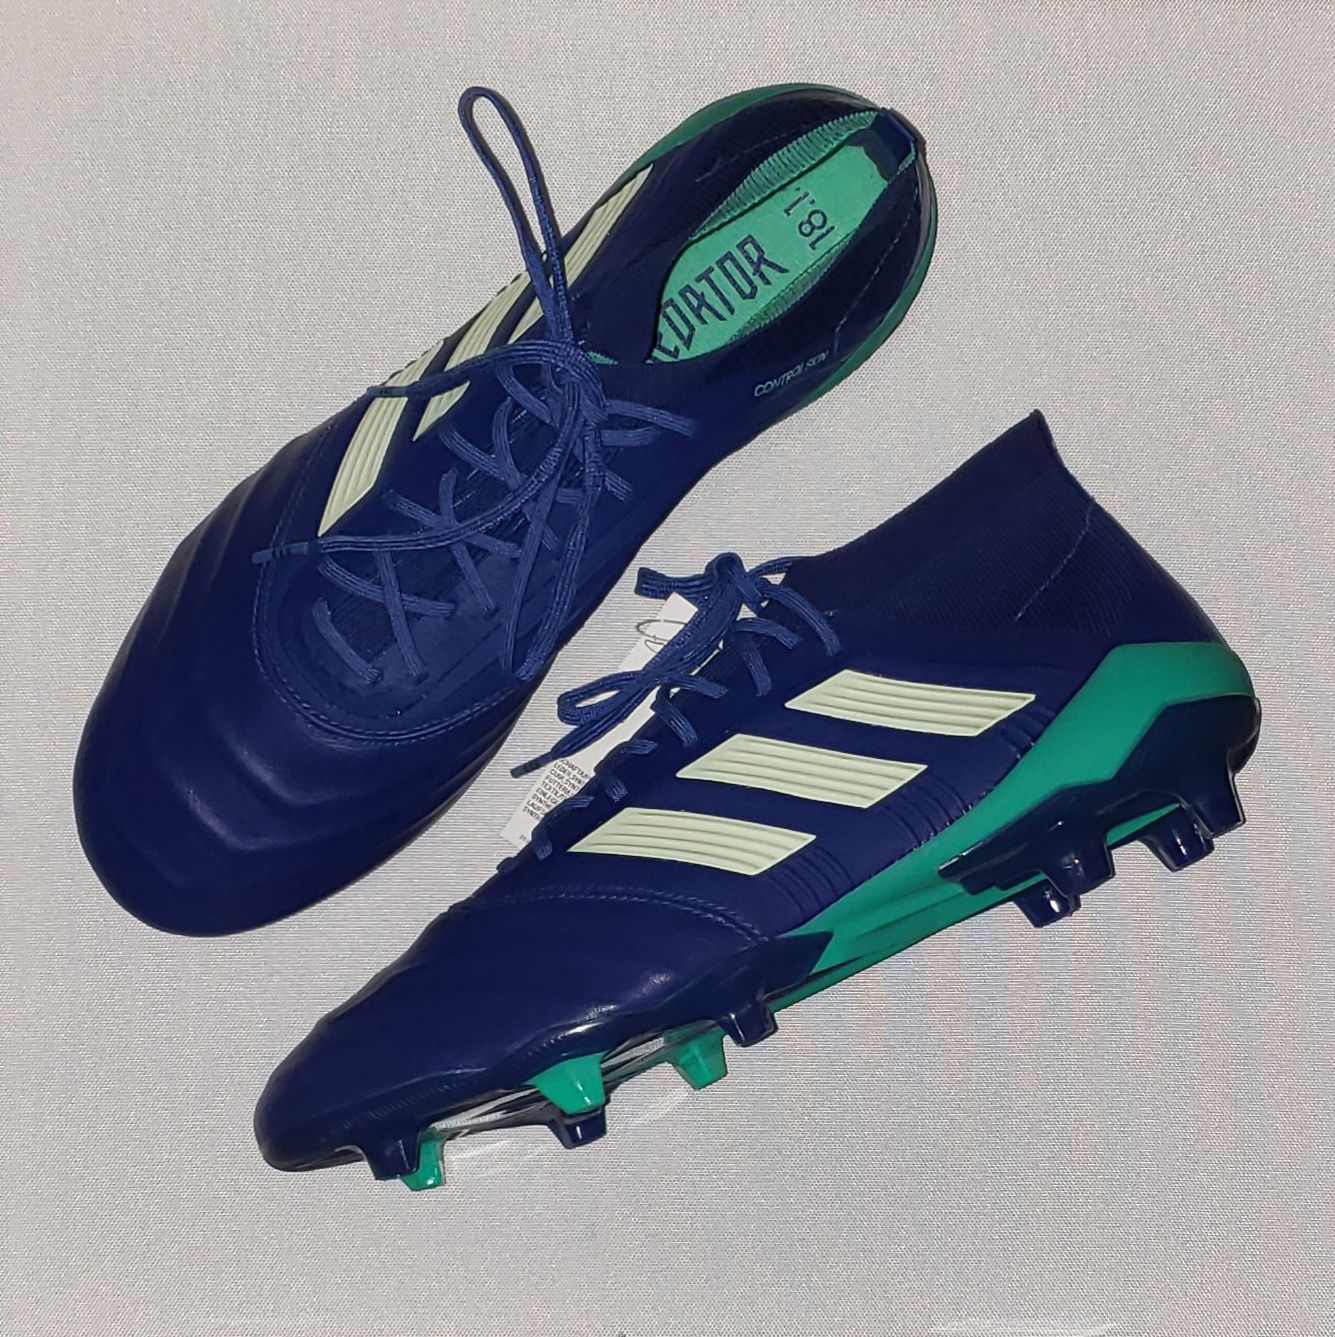 Sacrificio eso es todo cache Adidas Predator 18.1 Pro Kangaroo Leather Soccer Cleat Football Boot Blue  for Sale in Chicago, IL - OfferUp